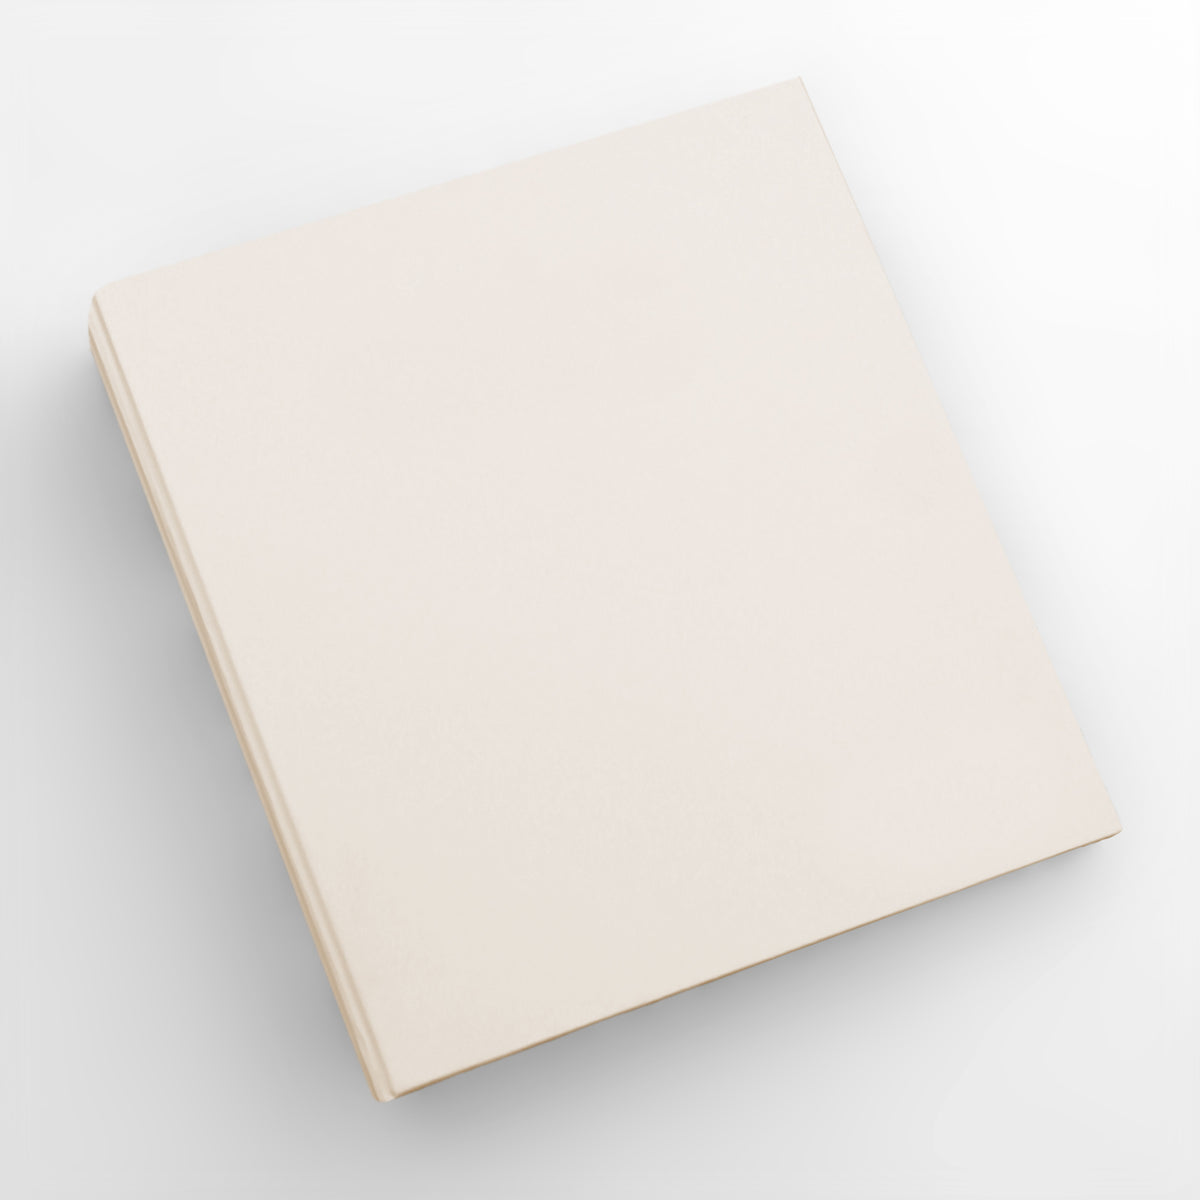 Large Photo Binder For 4x6 Photos | Cover: Pearl Vegan Leather | Available Personalized